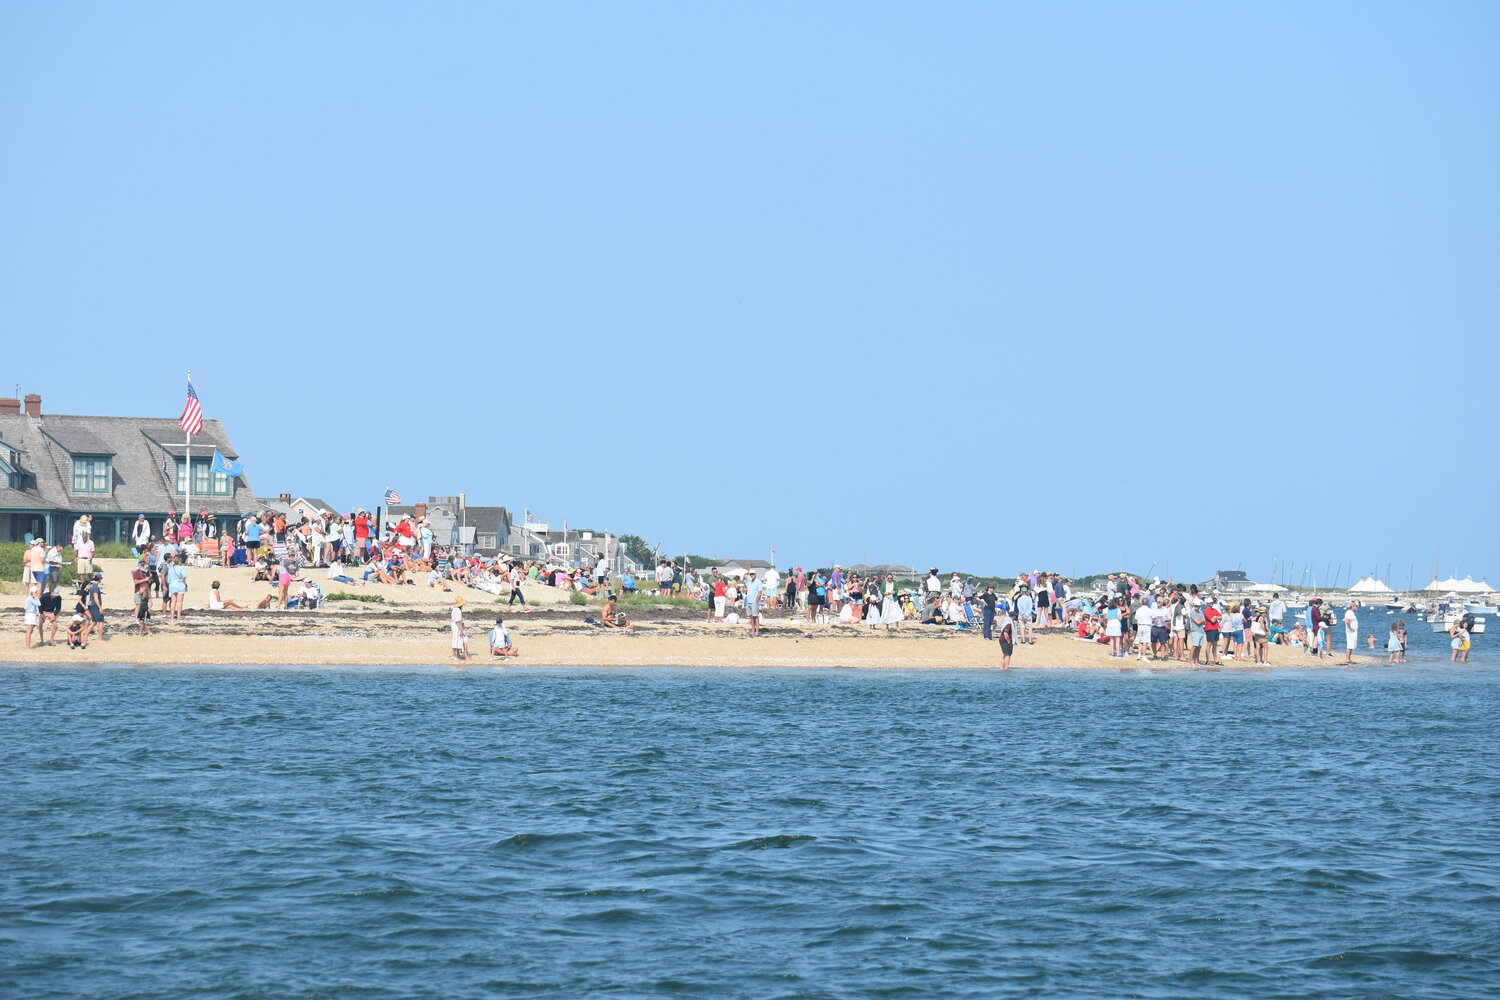 The crowd by Brant Point Light for the Rainbow Parade preceding the 51st annual Opera House Cup.